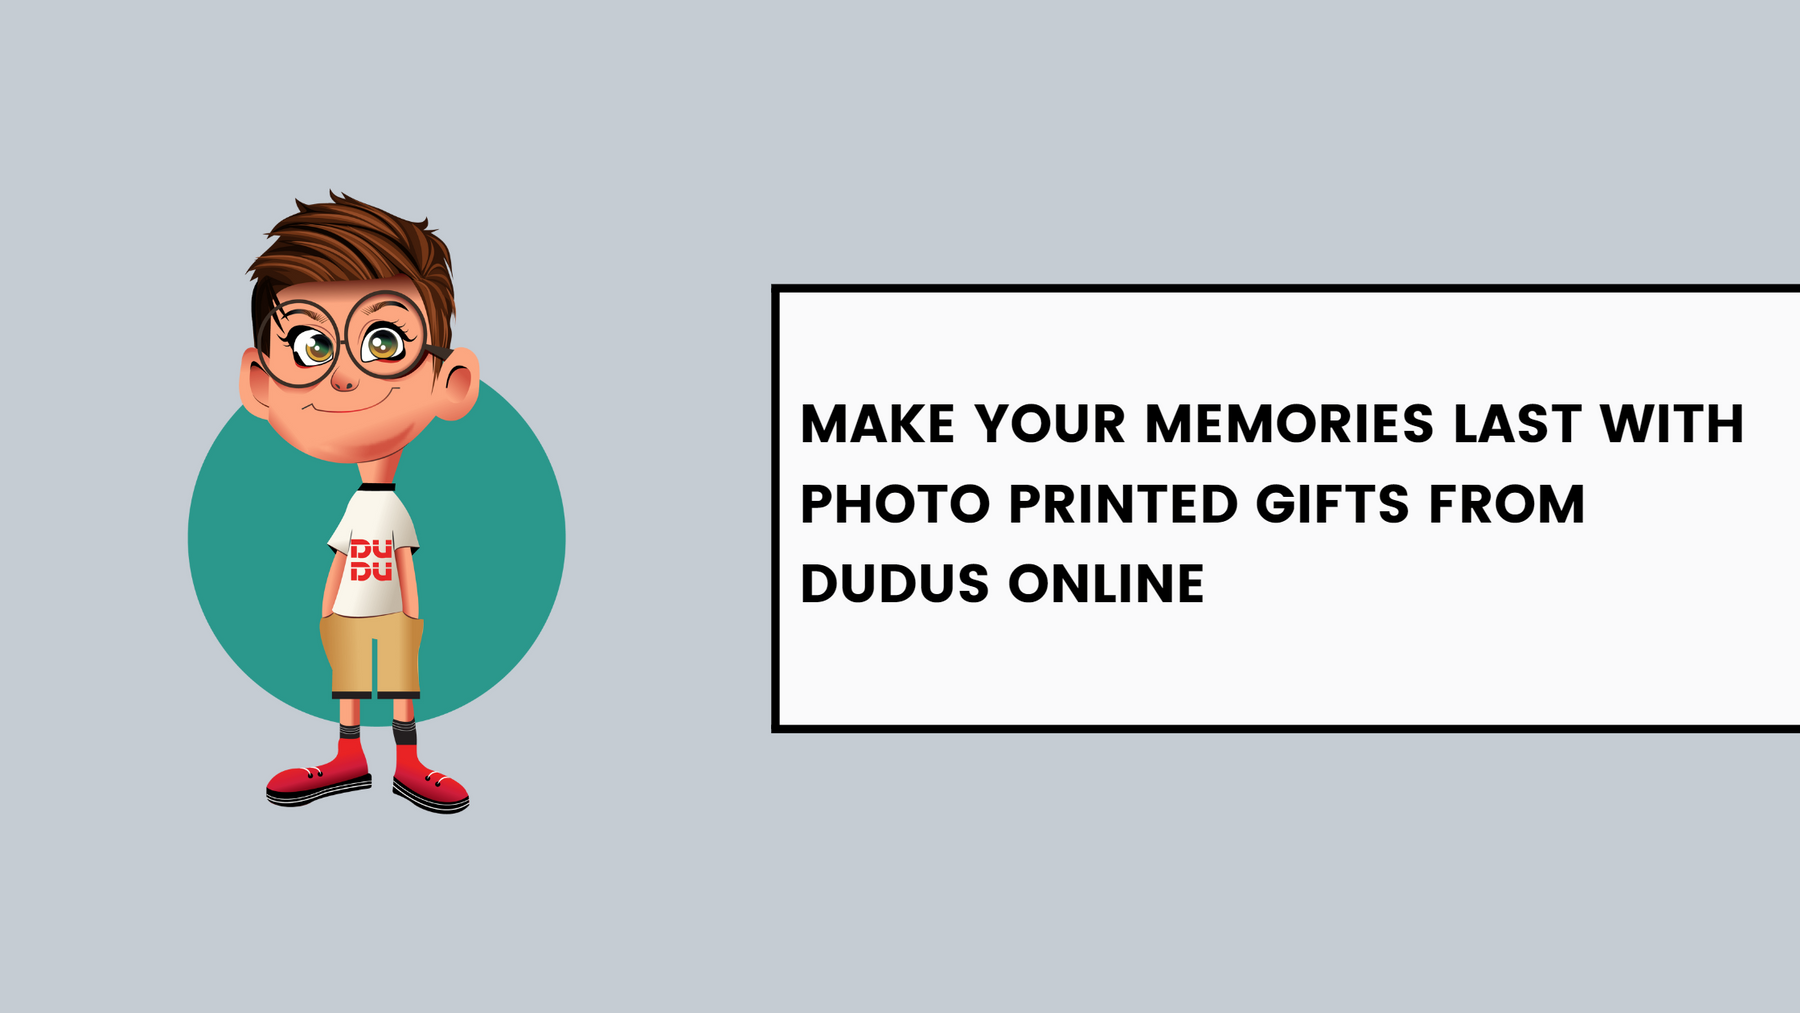 Make Your Memories Last with Photo Printed Gifts from Dudus Online